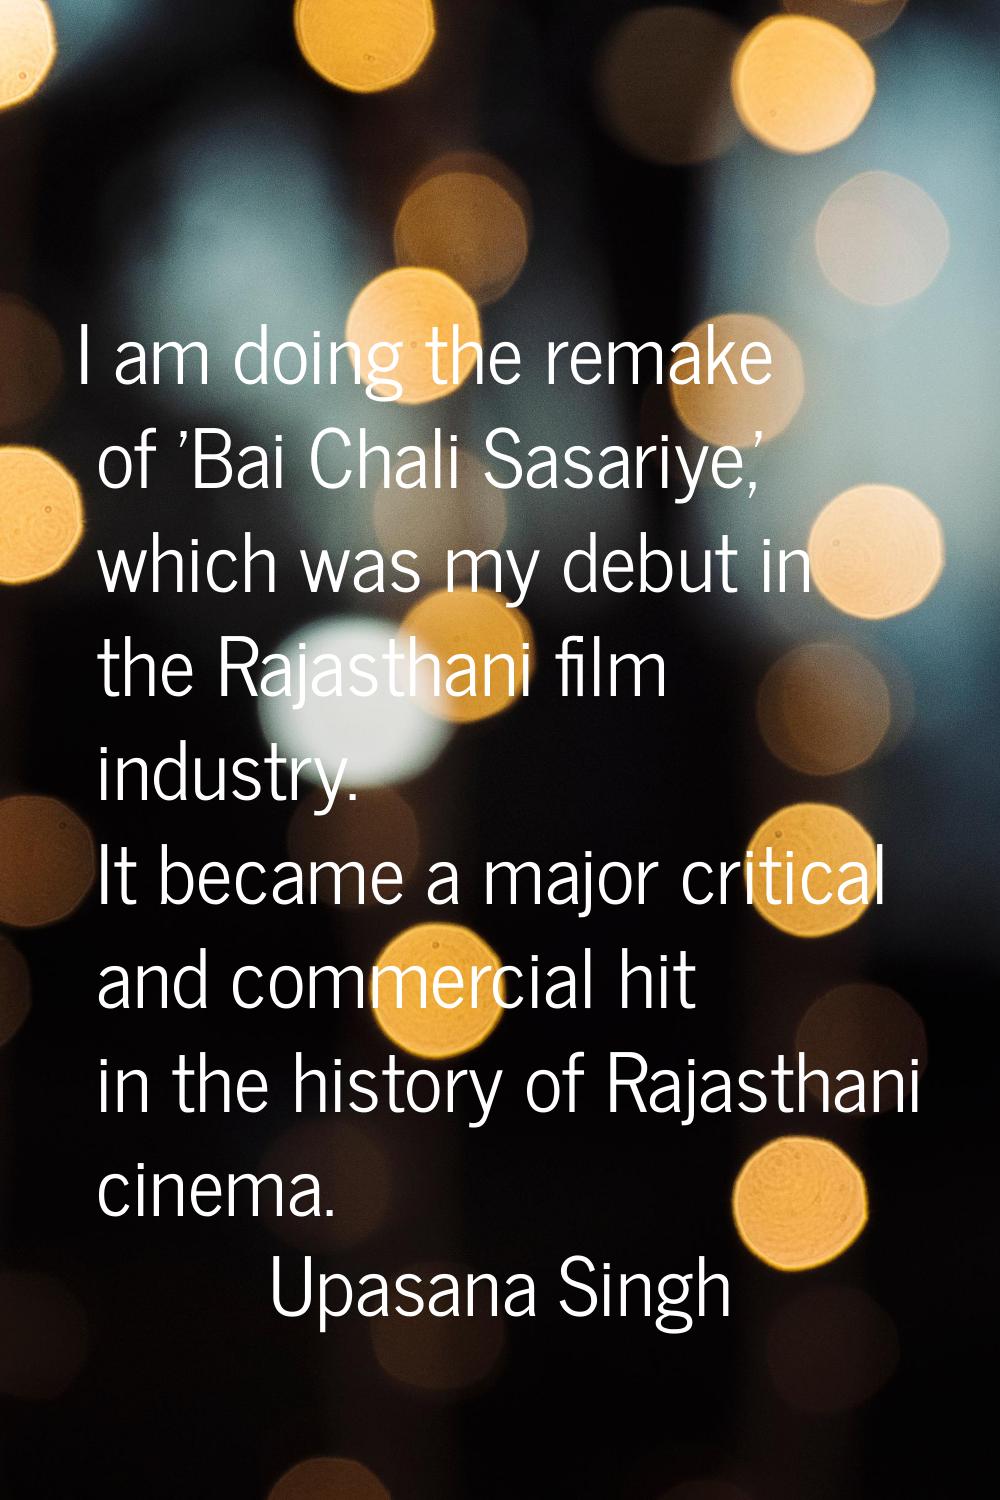 I am doing the remake of 'Bai Chali Sasariye,' which was my debut in the Rajasthani film industry. 